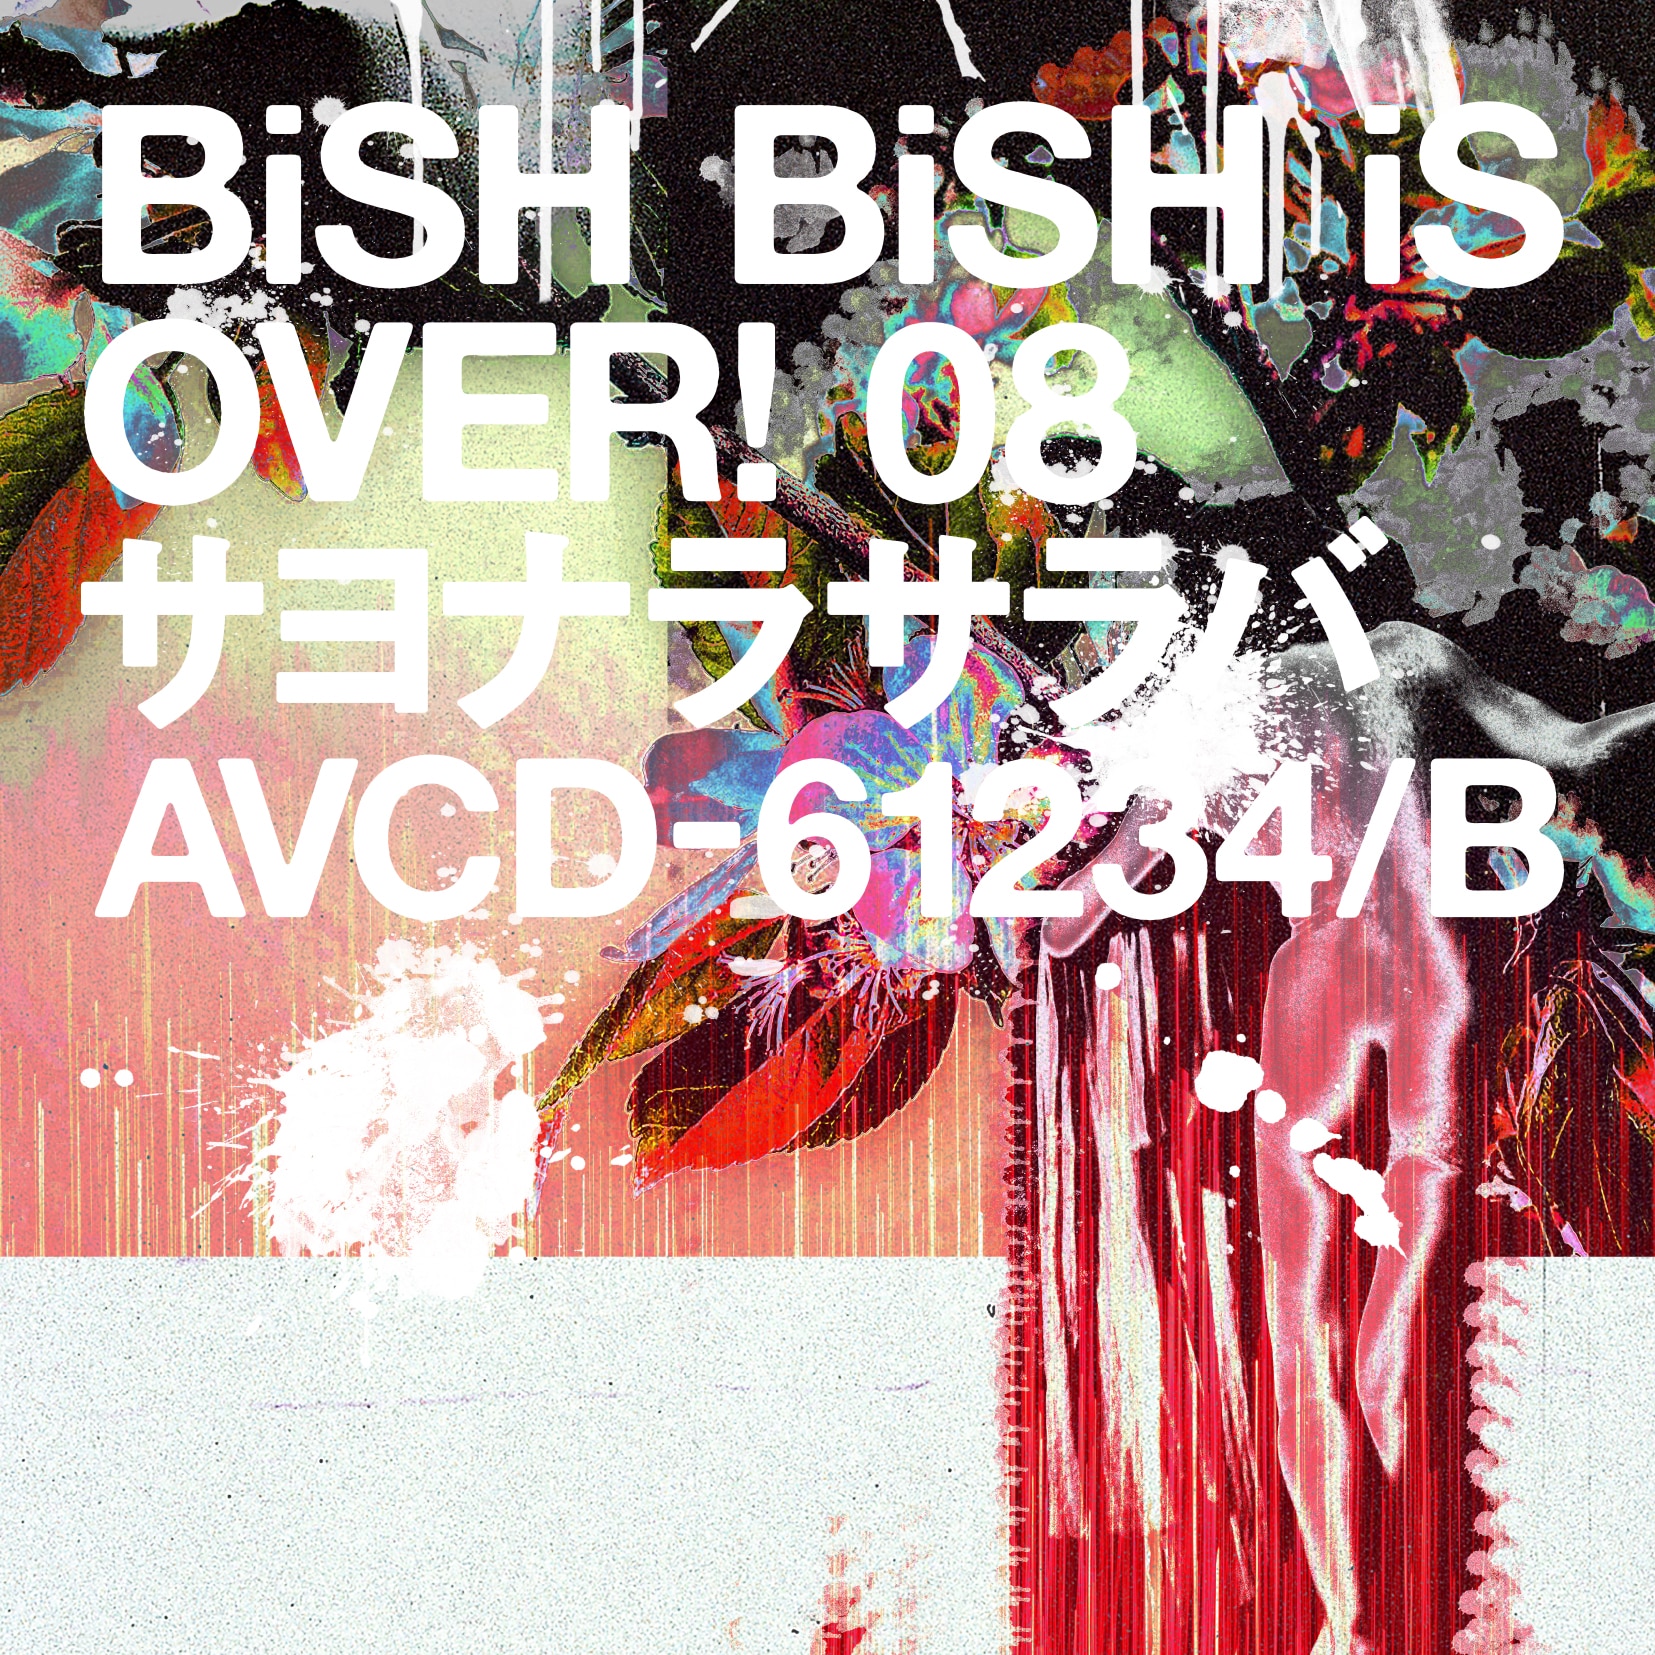 DISCOGRAPHY | BiSH Official Site